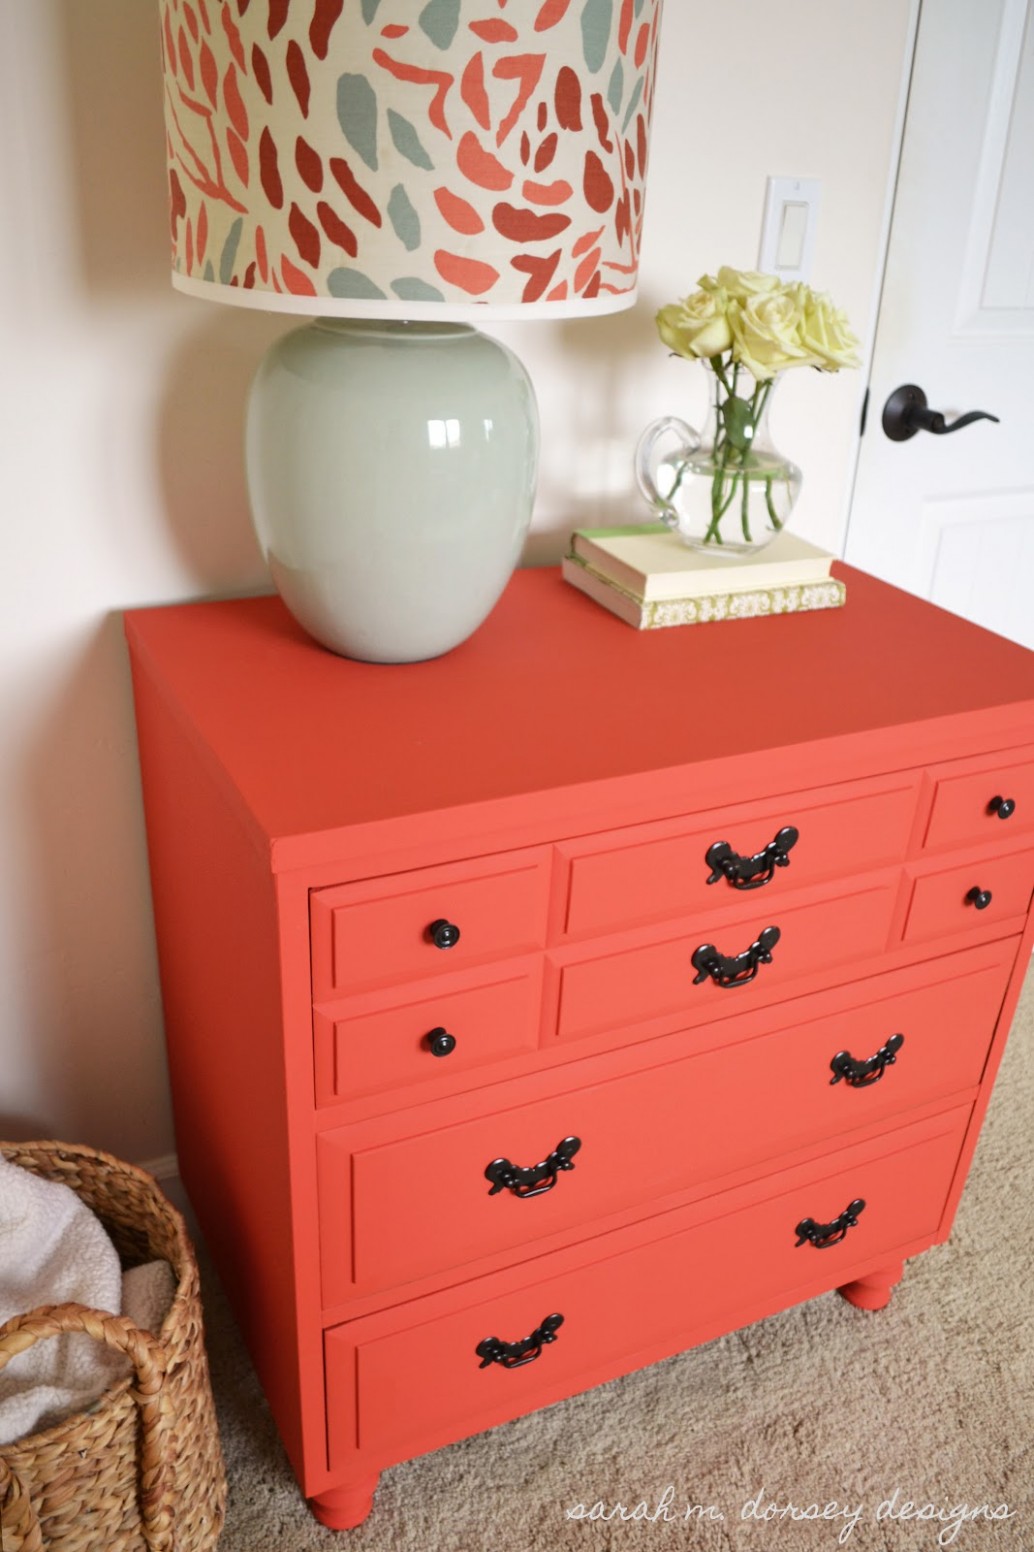 Coral Dresser For The Guest Bedroom Dorsey Designs How To Mix Annie Sloan Chalk Paint Colors